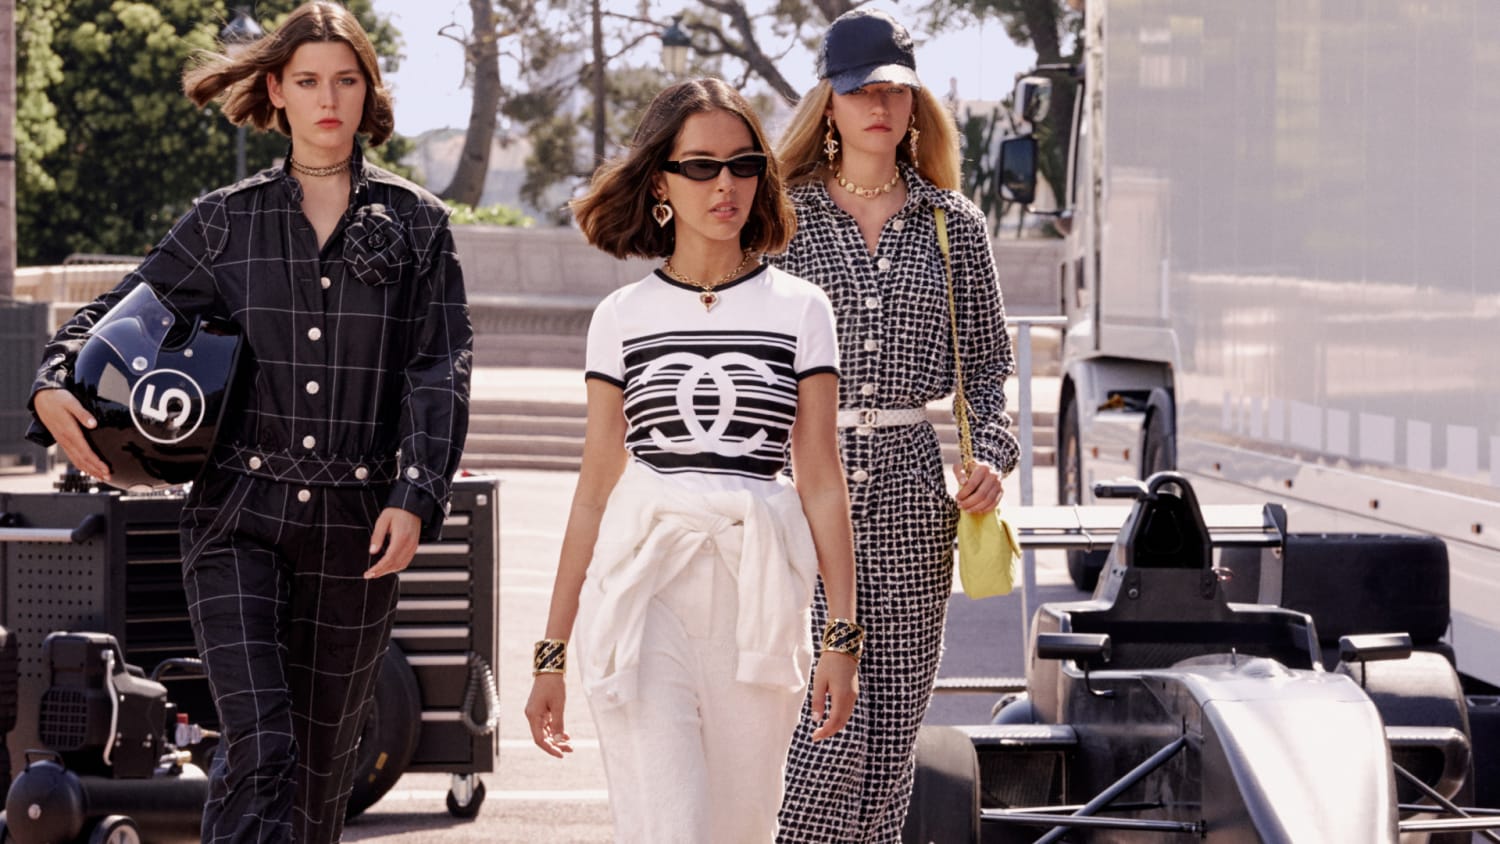 Chanel Cruise 2022 show pays homage to Karl Lagerfeld